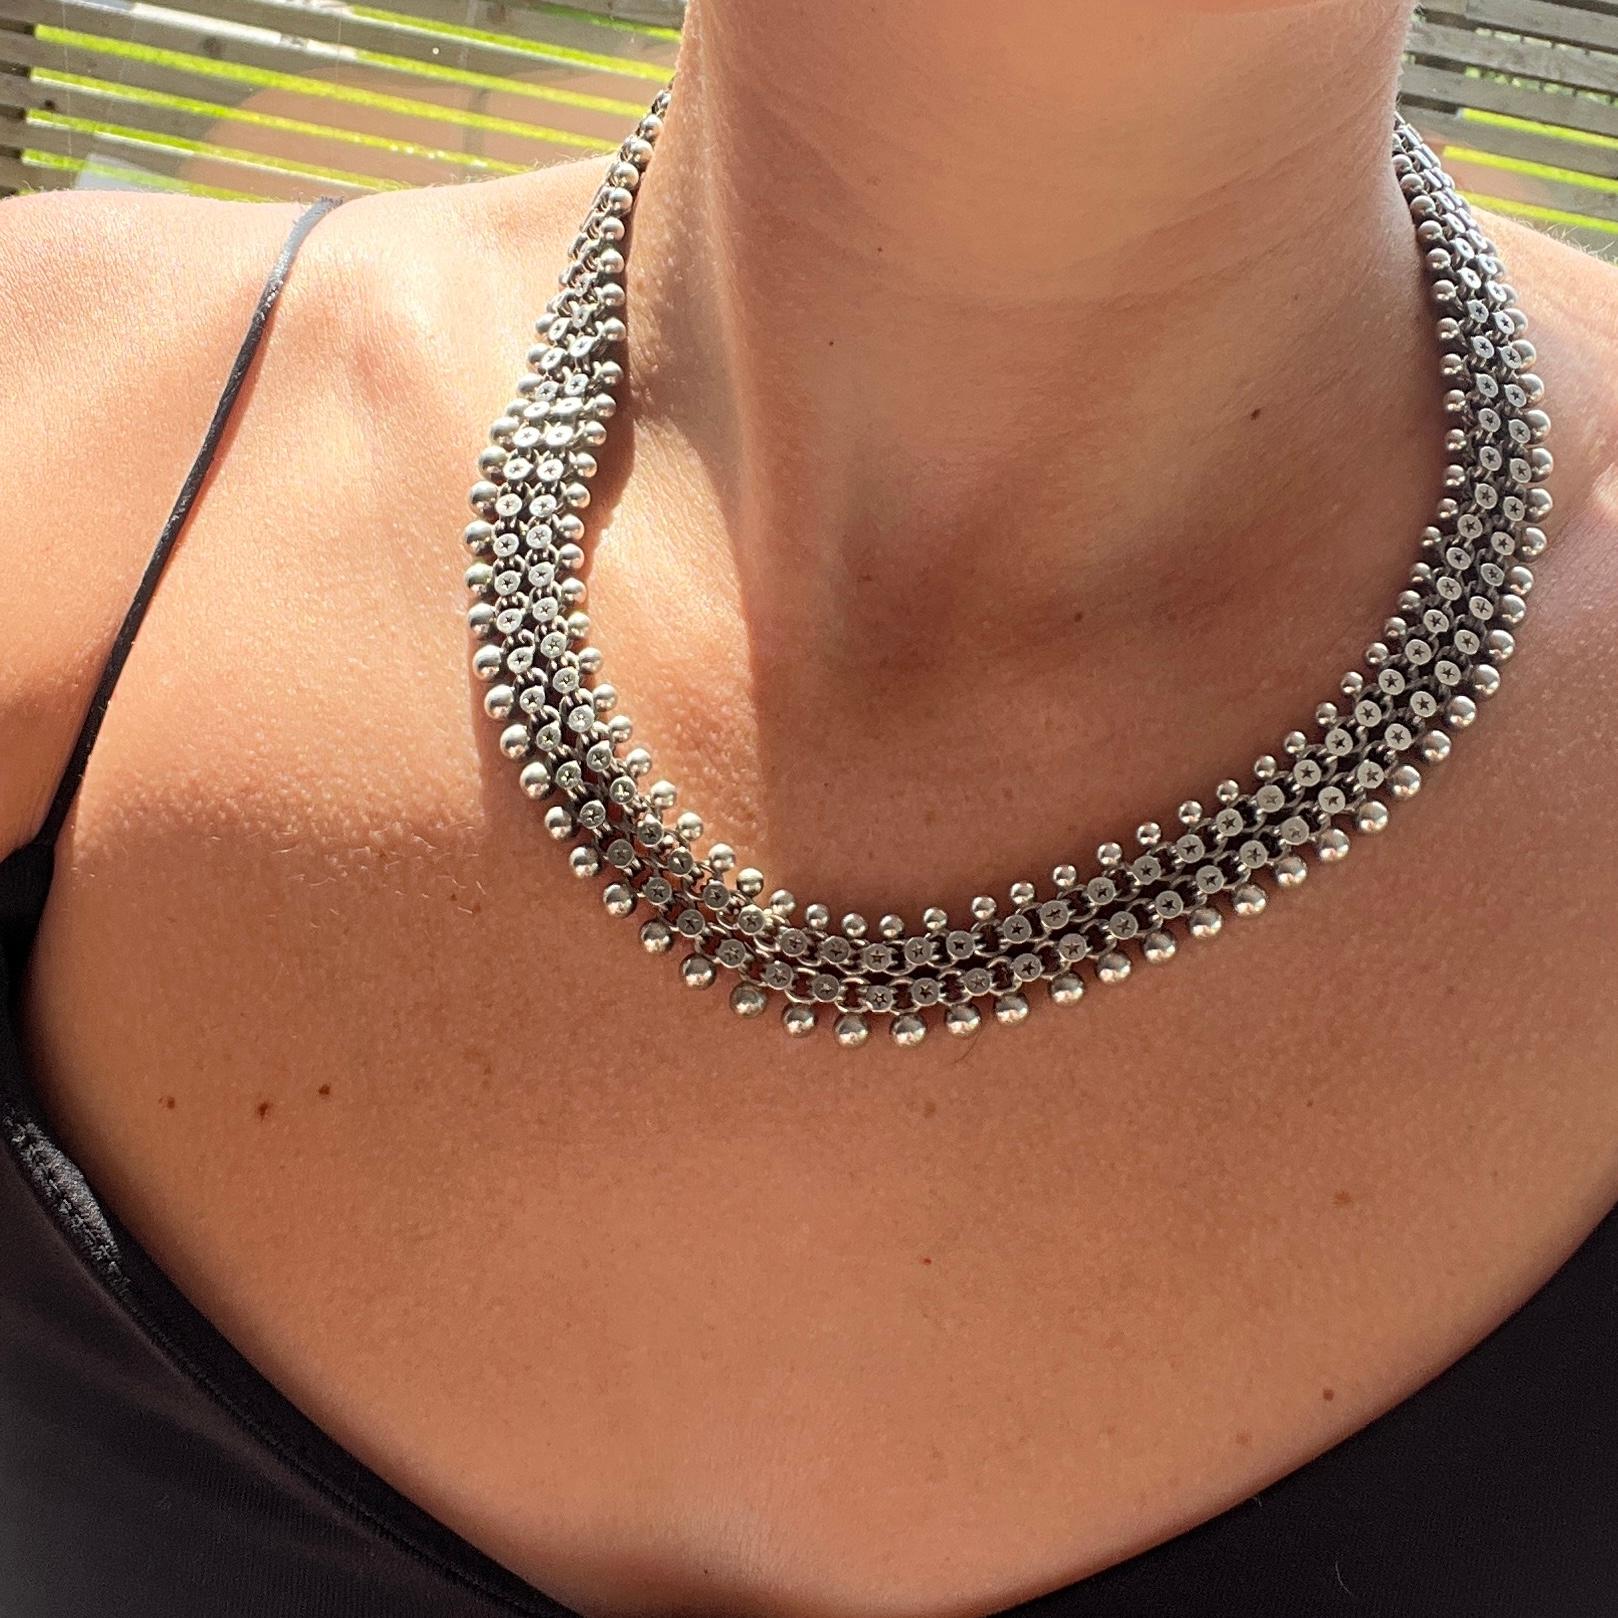 This necklace could be worn two ways, the more decorative side or the simple side. The links have wonderful stars on them on the one side and then the other side is smooth and glossy silver.  The necklace is fastened using a large bolt clasp.